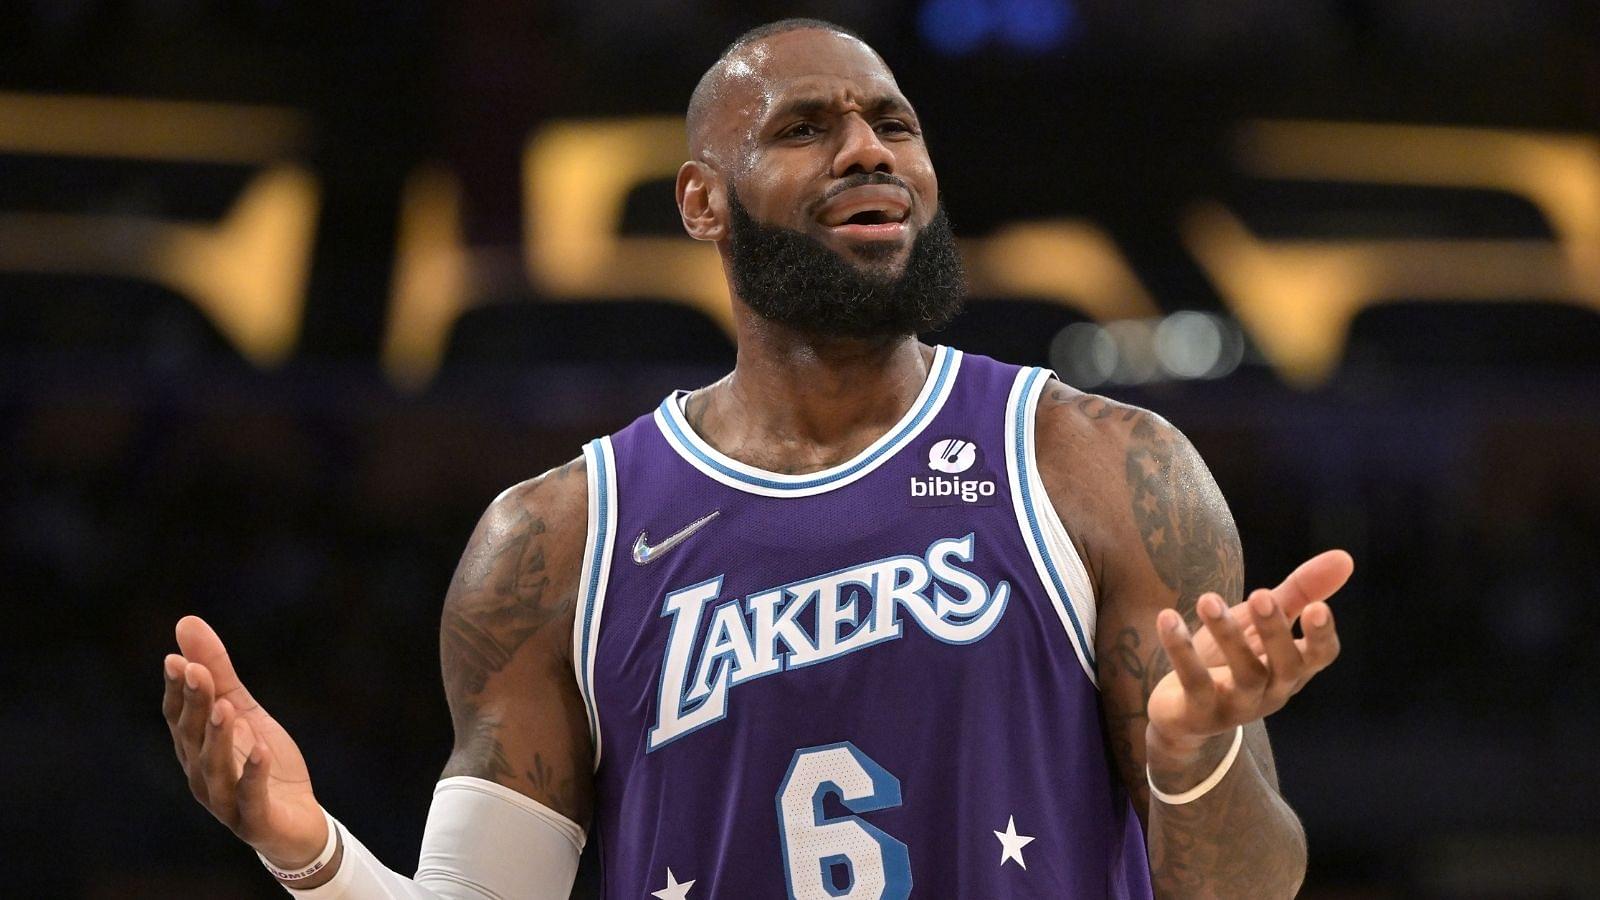 "LeBron James will fail to keep a winning record for the first time since his debut season": In games he has participated in, the Lakers superstar never missed a winning record barring his rookie year